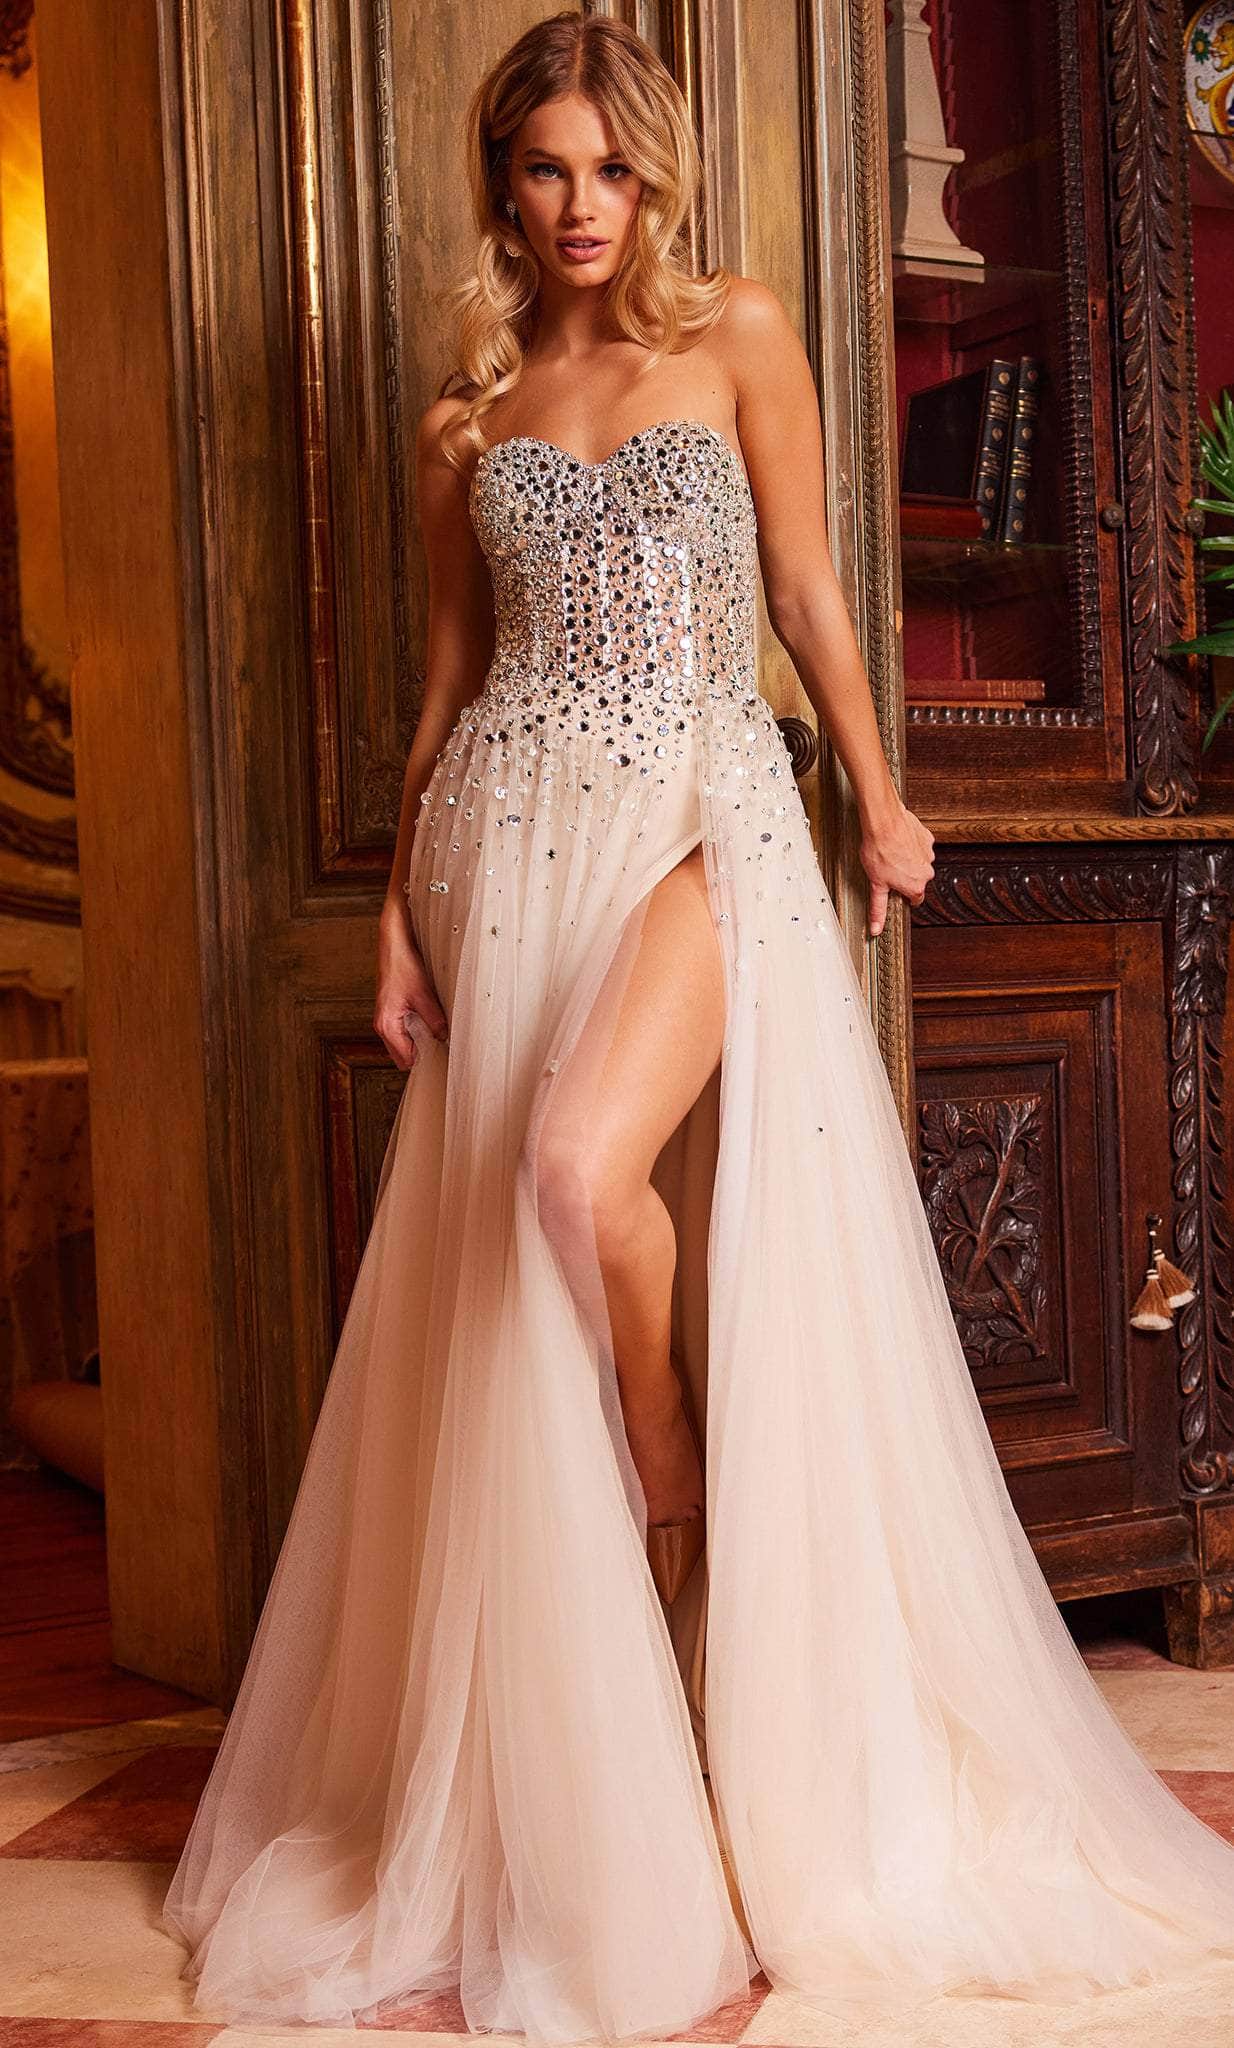 Image of Jovani 23712 - Beaded Corset Bodice Prom Gown